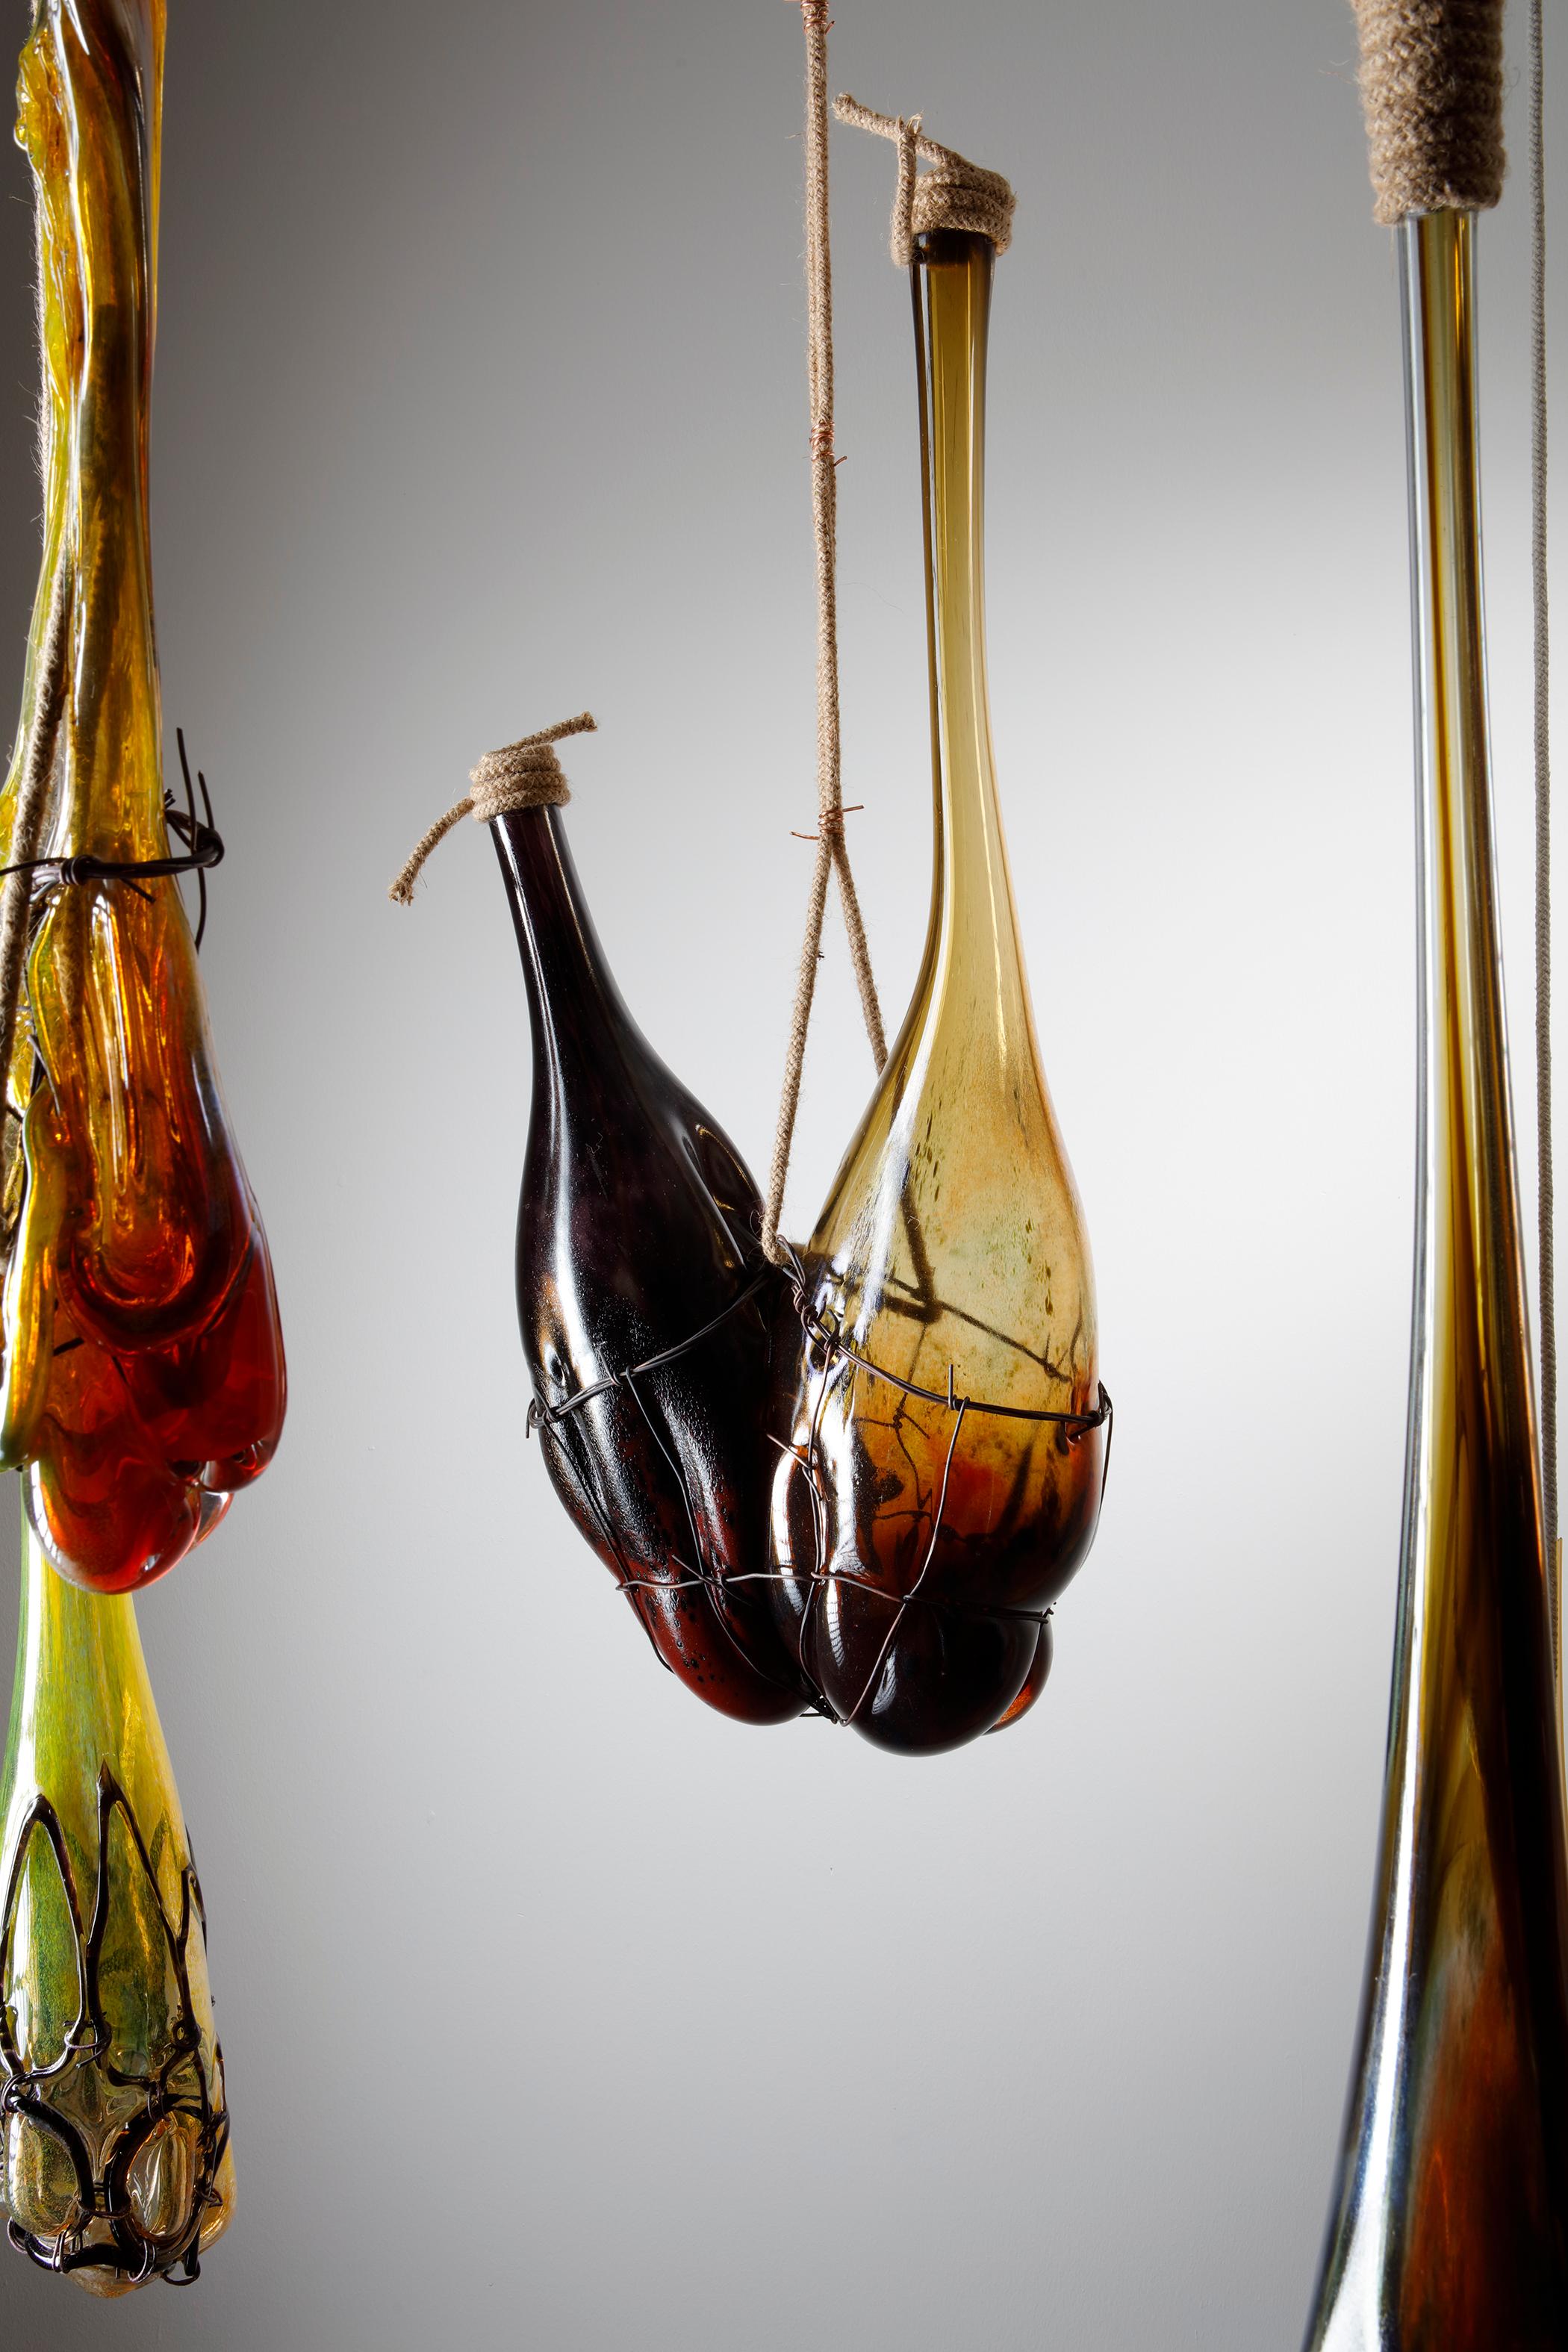 Hand-Crafted Strange Fruit Installation, a Unique Glass Hanging Sculpture by Chris Day